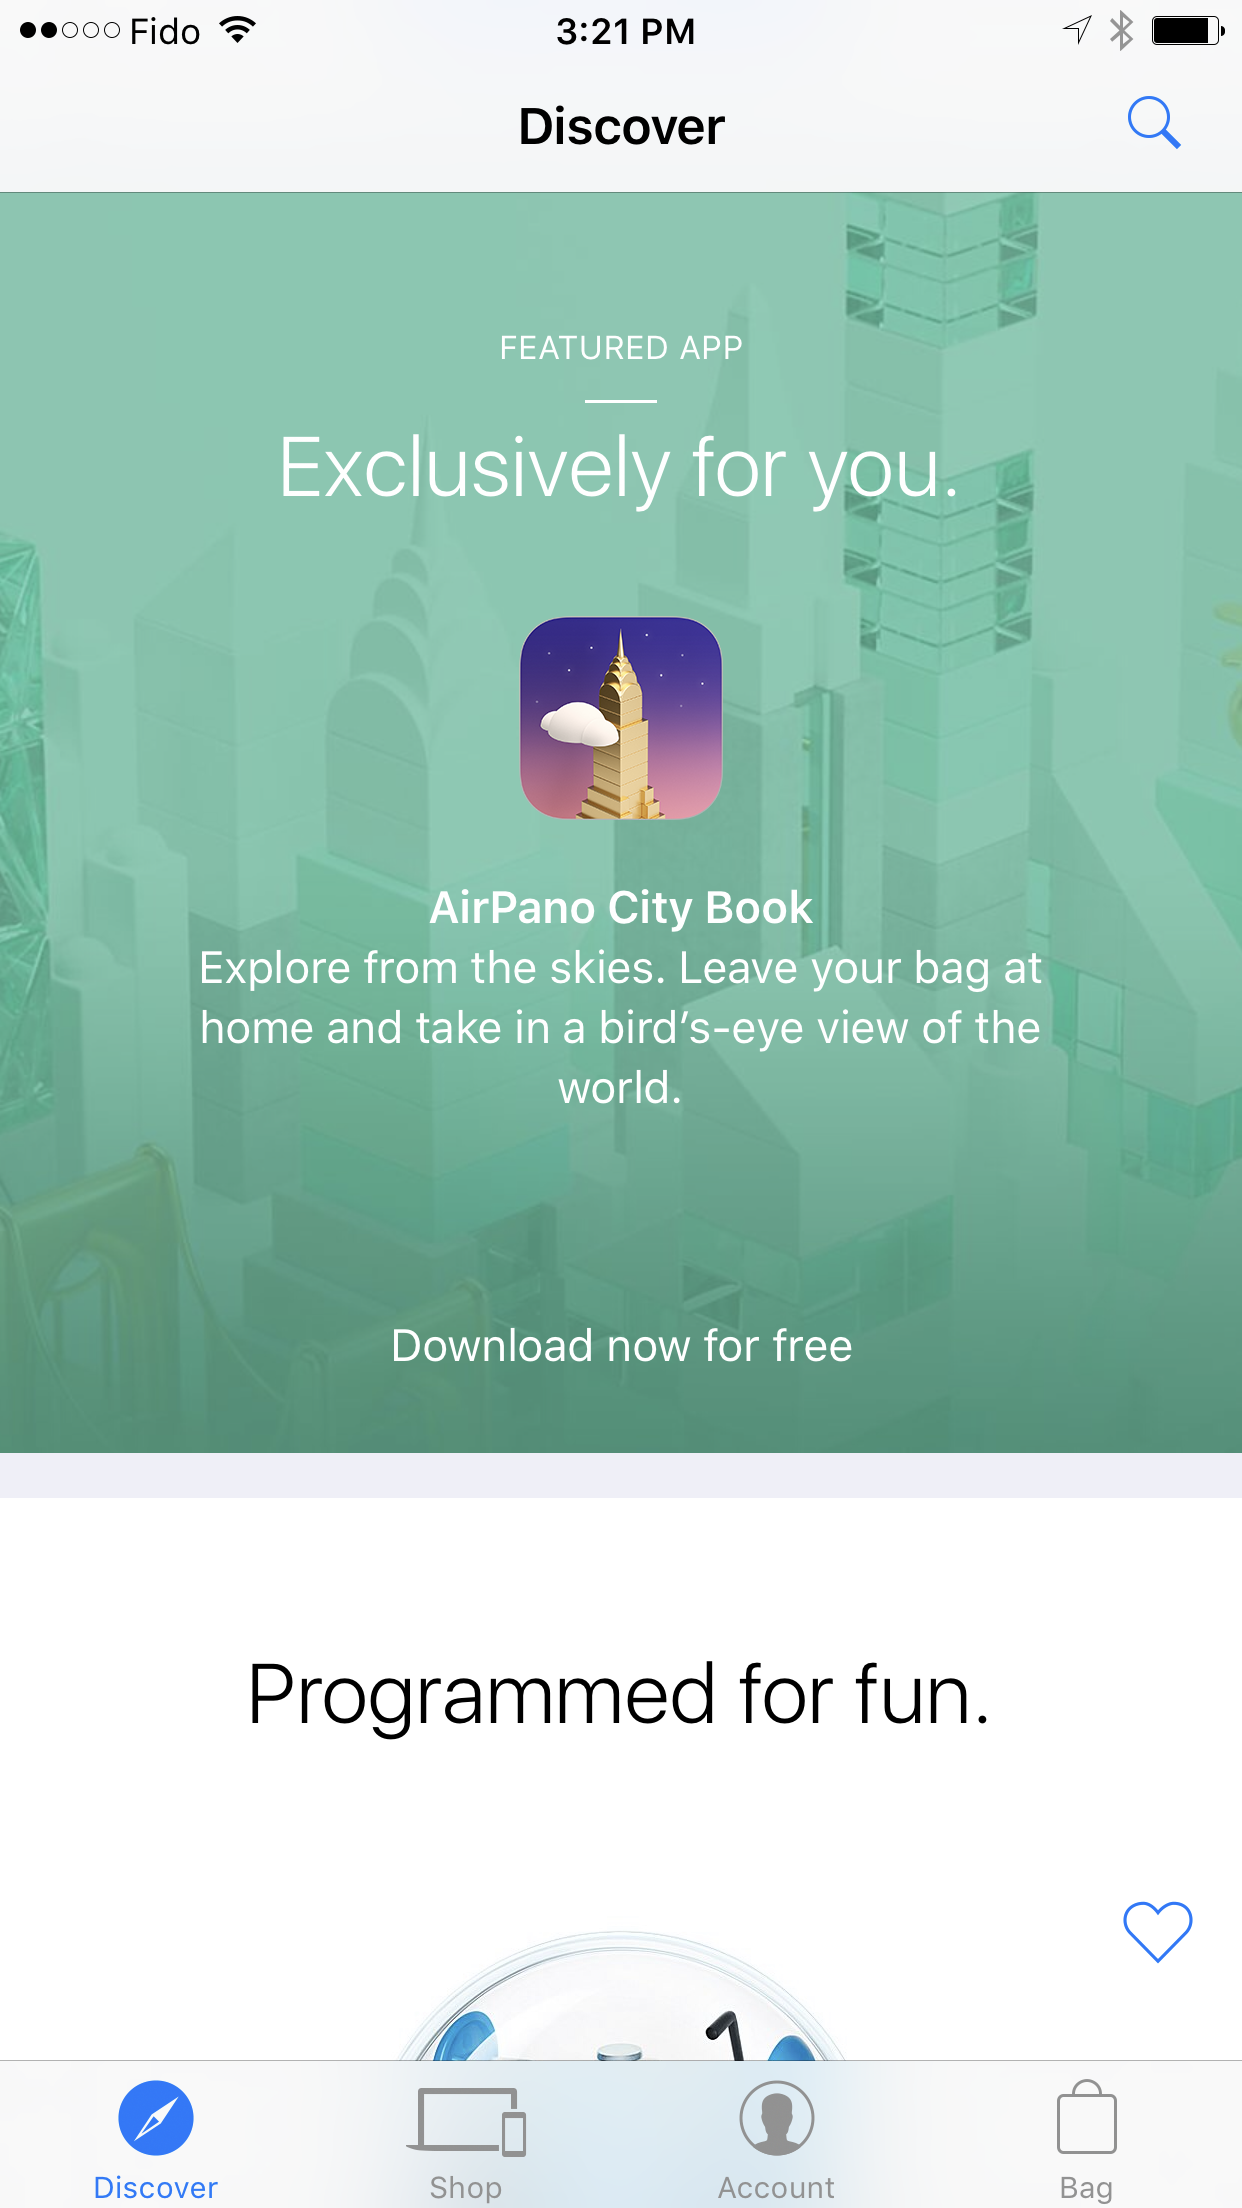 Apple Offers &#039;AirPano City Book&#039; as a Free Download via the Apple Store App